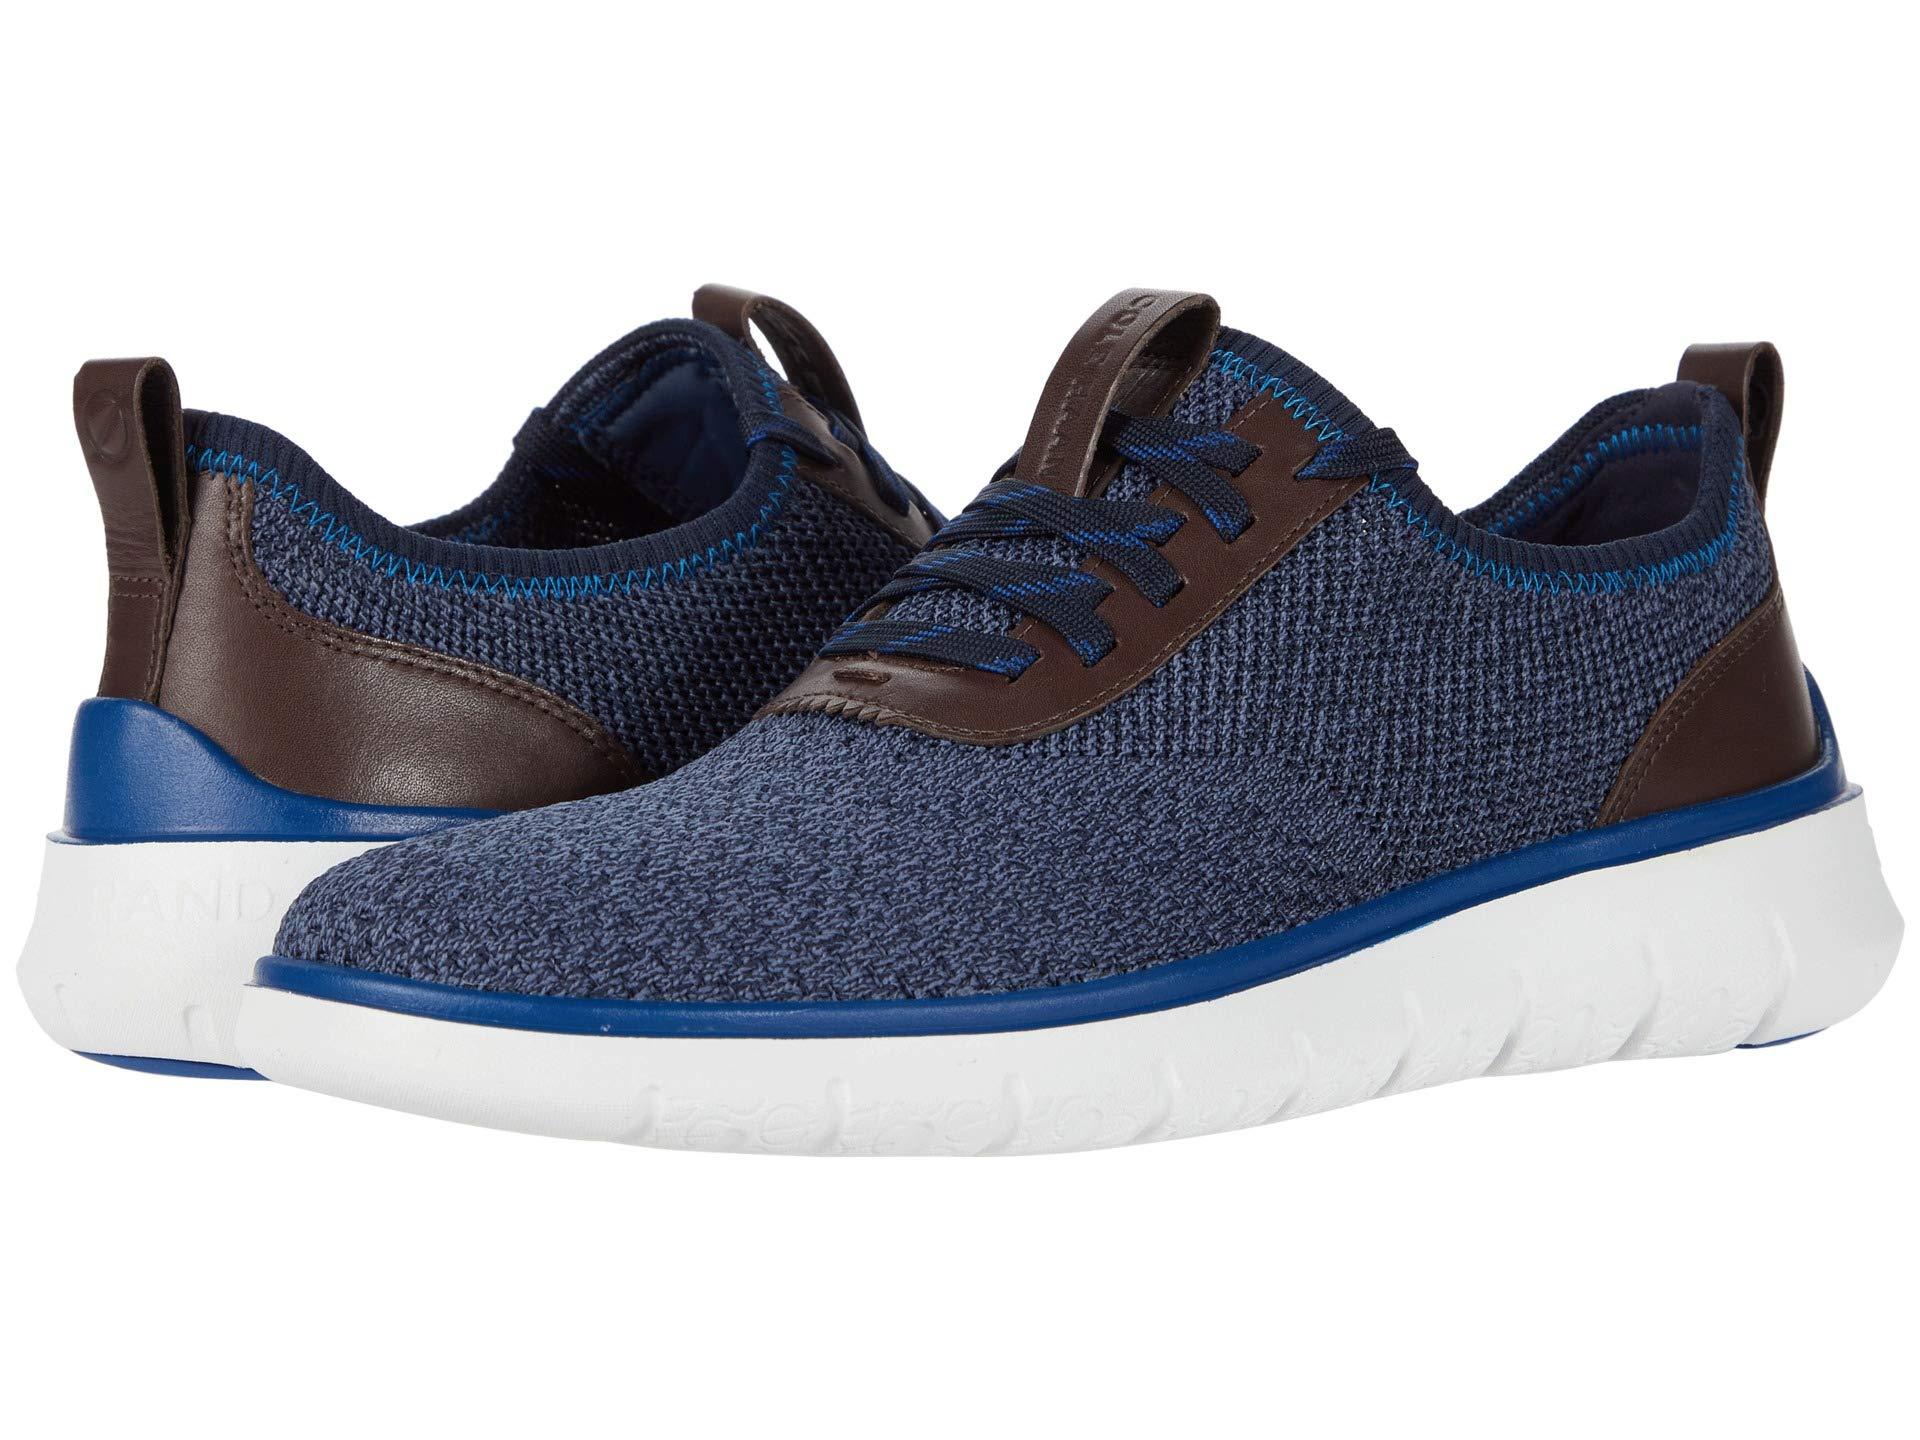 Cole Haan Synthetic Generation Zerogrand Stitchlite in Blue for Men - Lyst